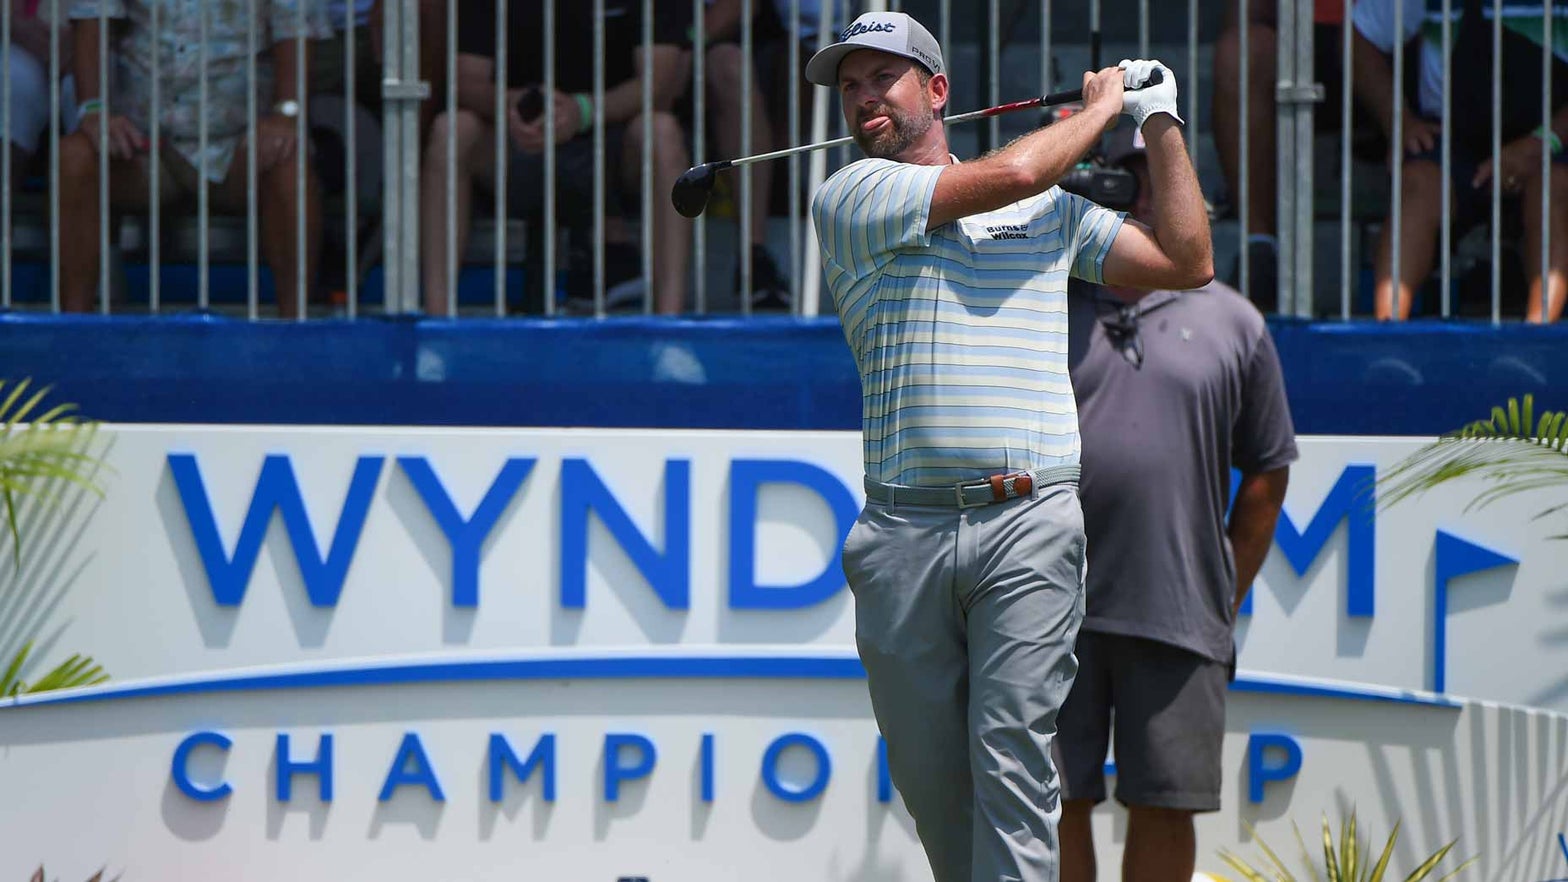 2022 Wyndham Championship How to watch, TV schedule, tee times